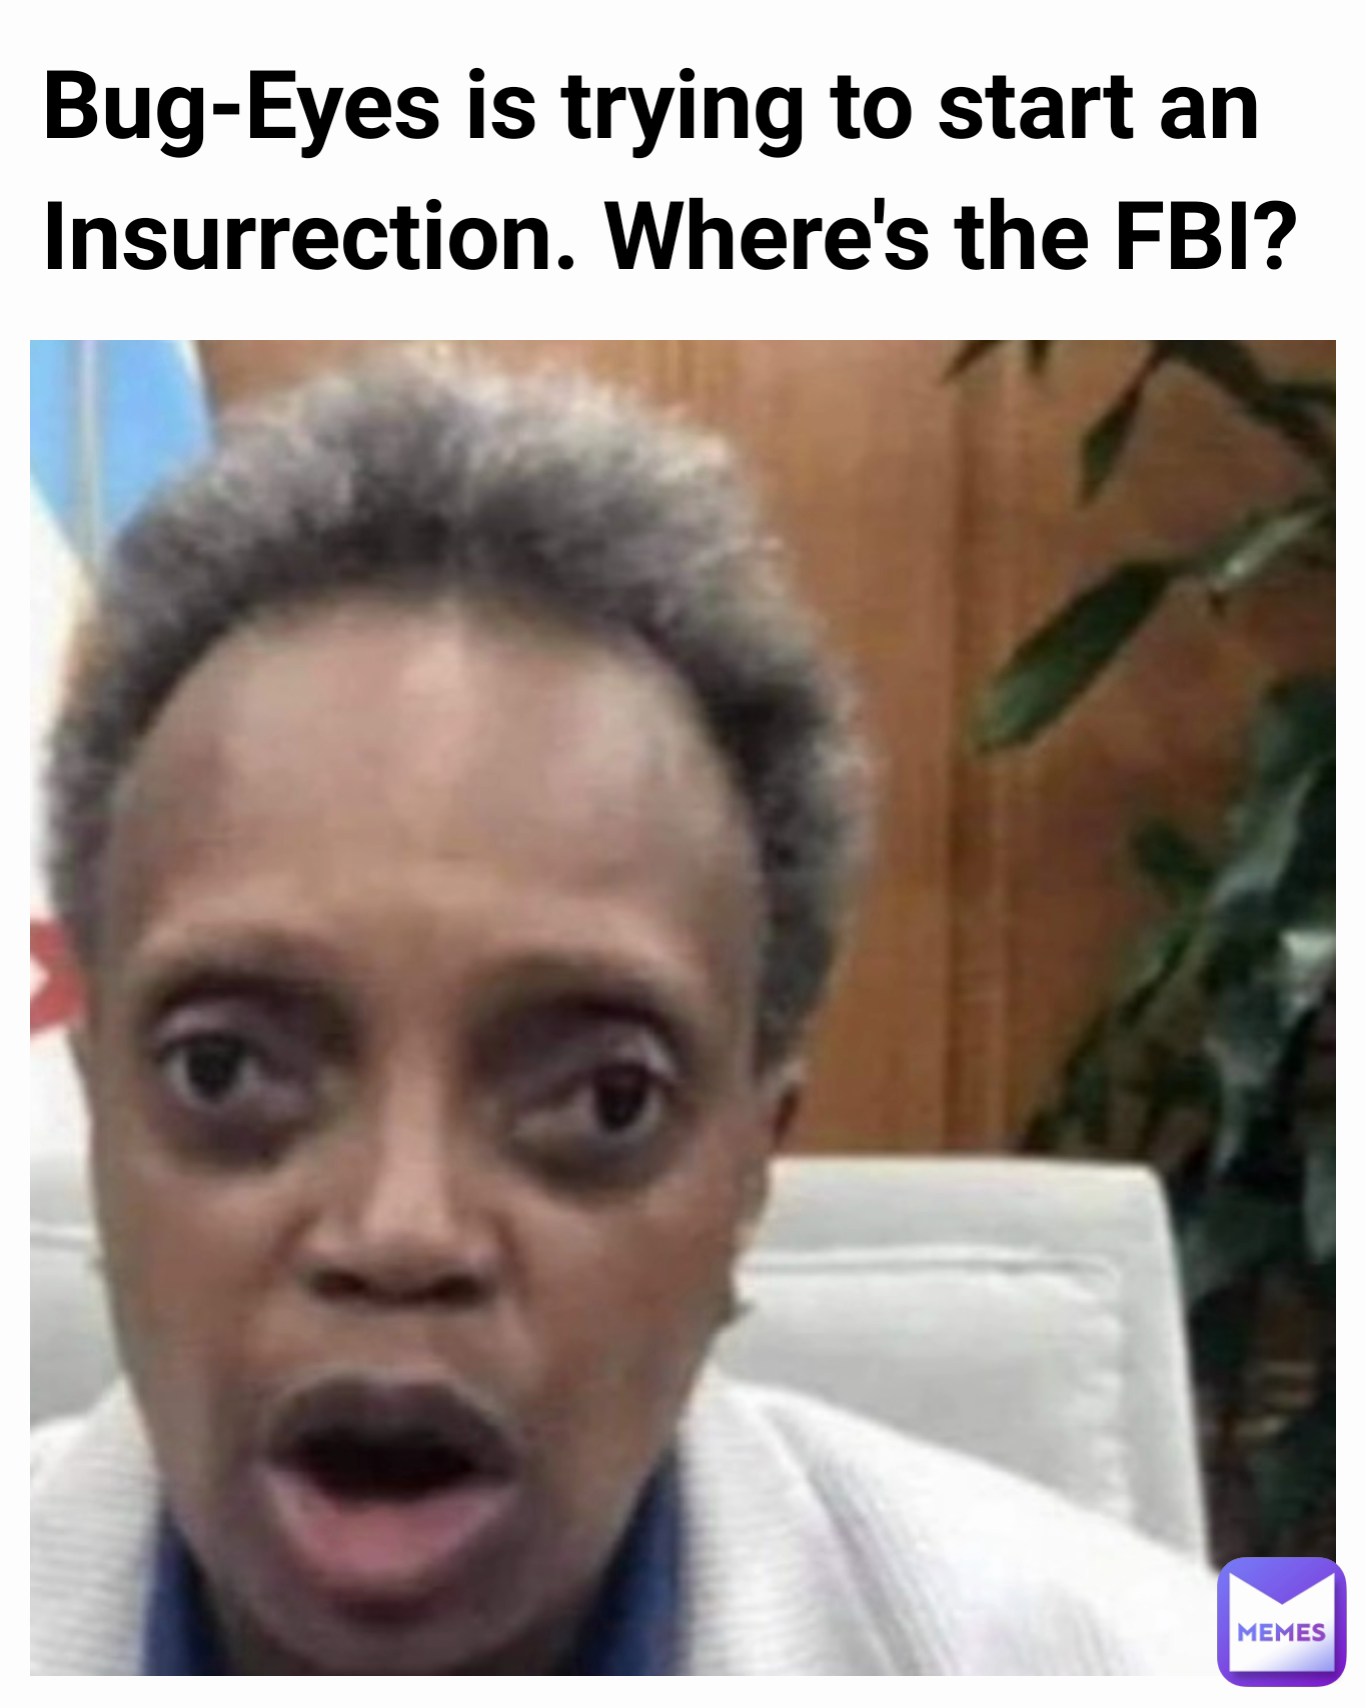 Bug-Eyes is trying to start an Insurrection. Where's the FBI?